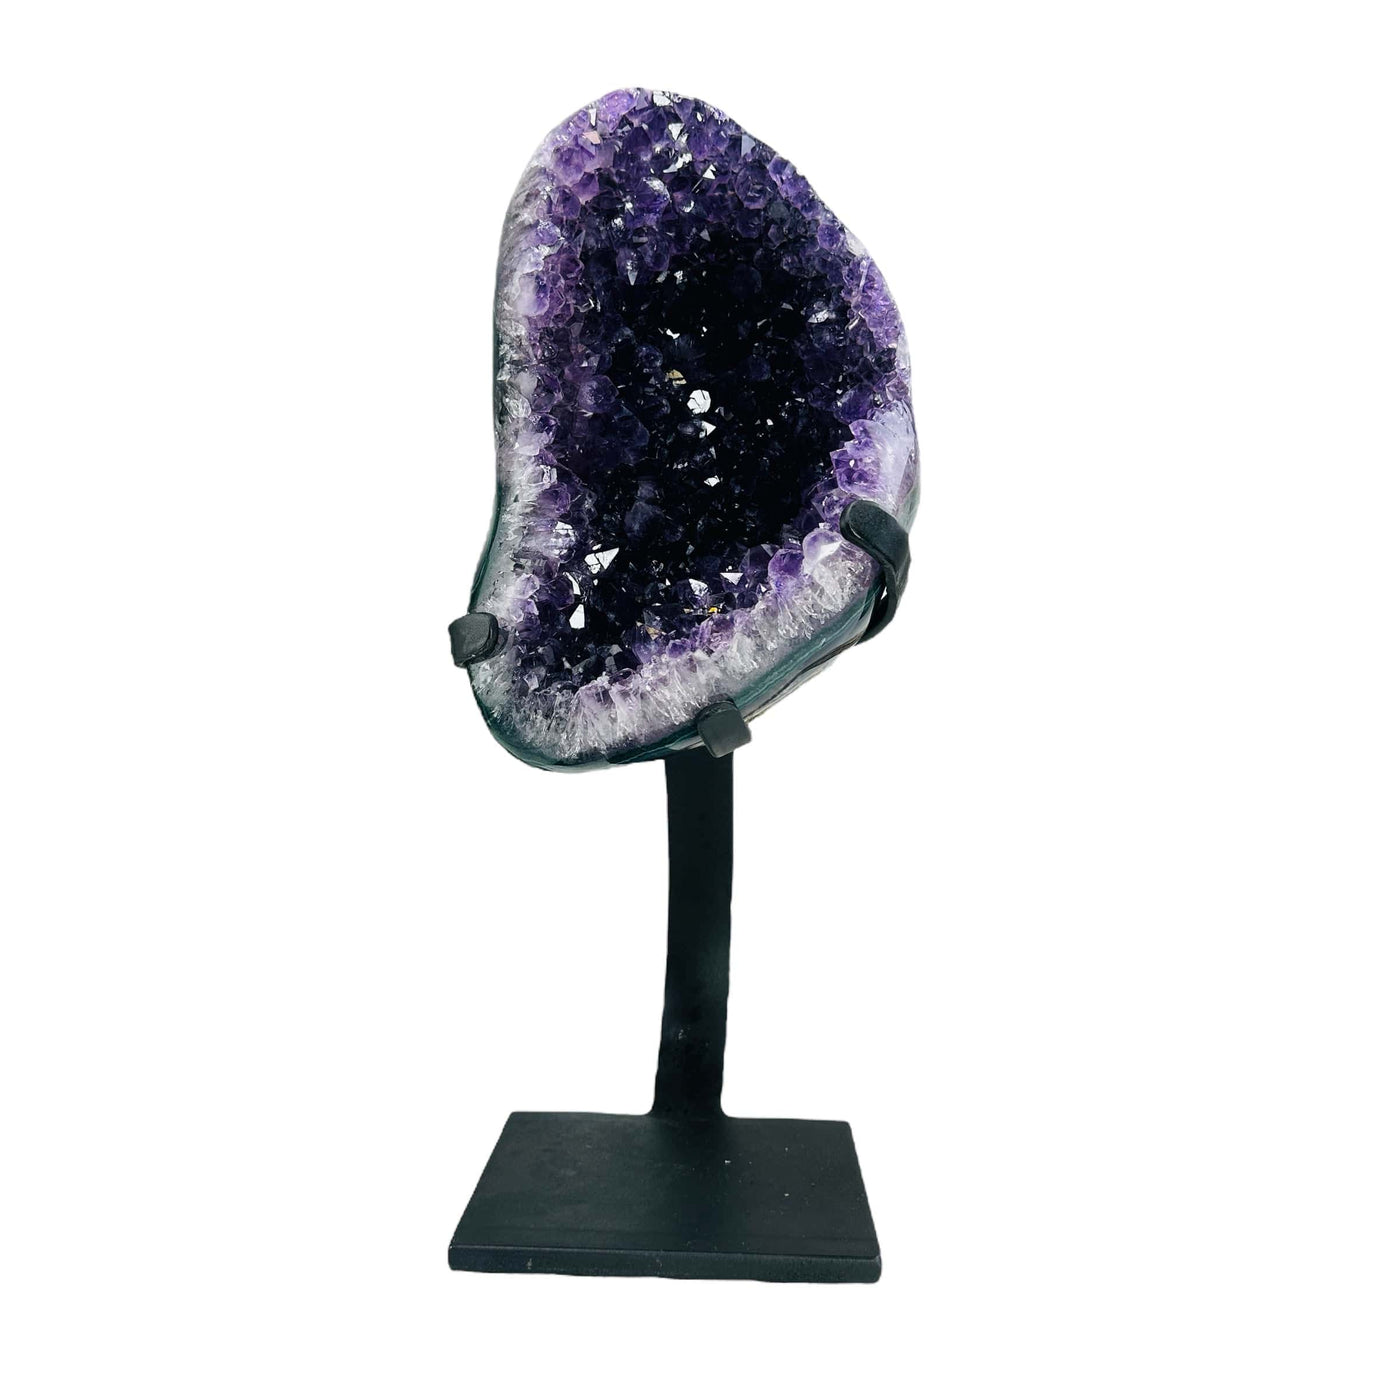 amethyst with stand on white background